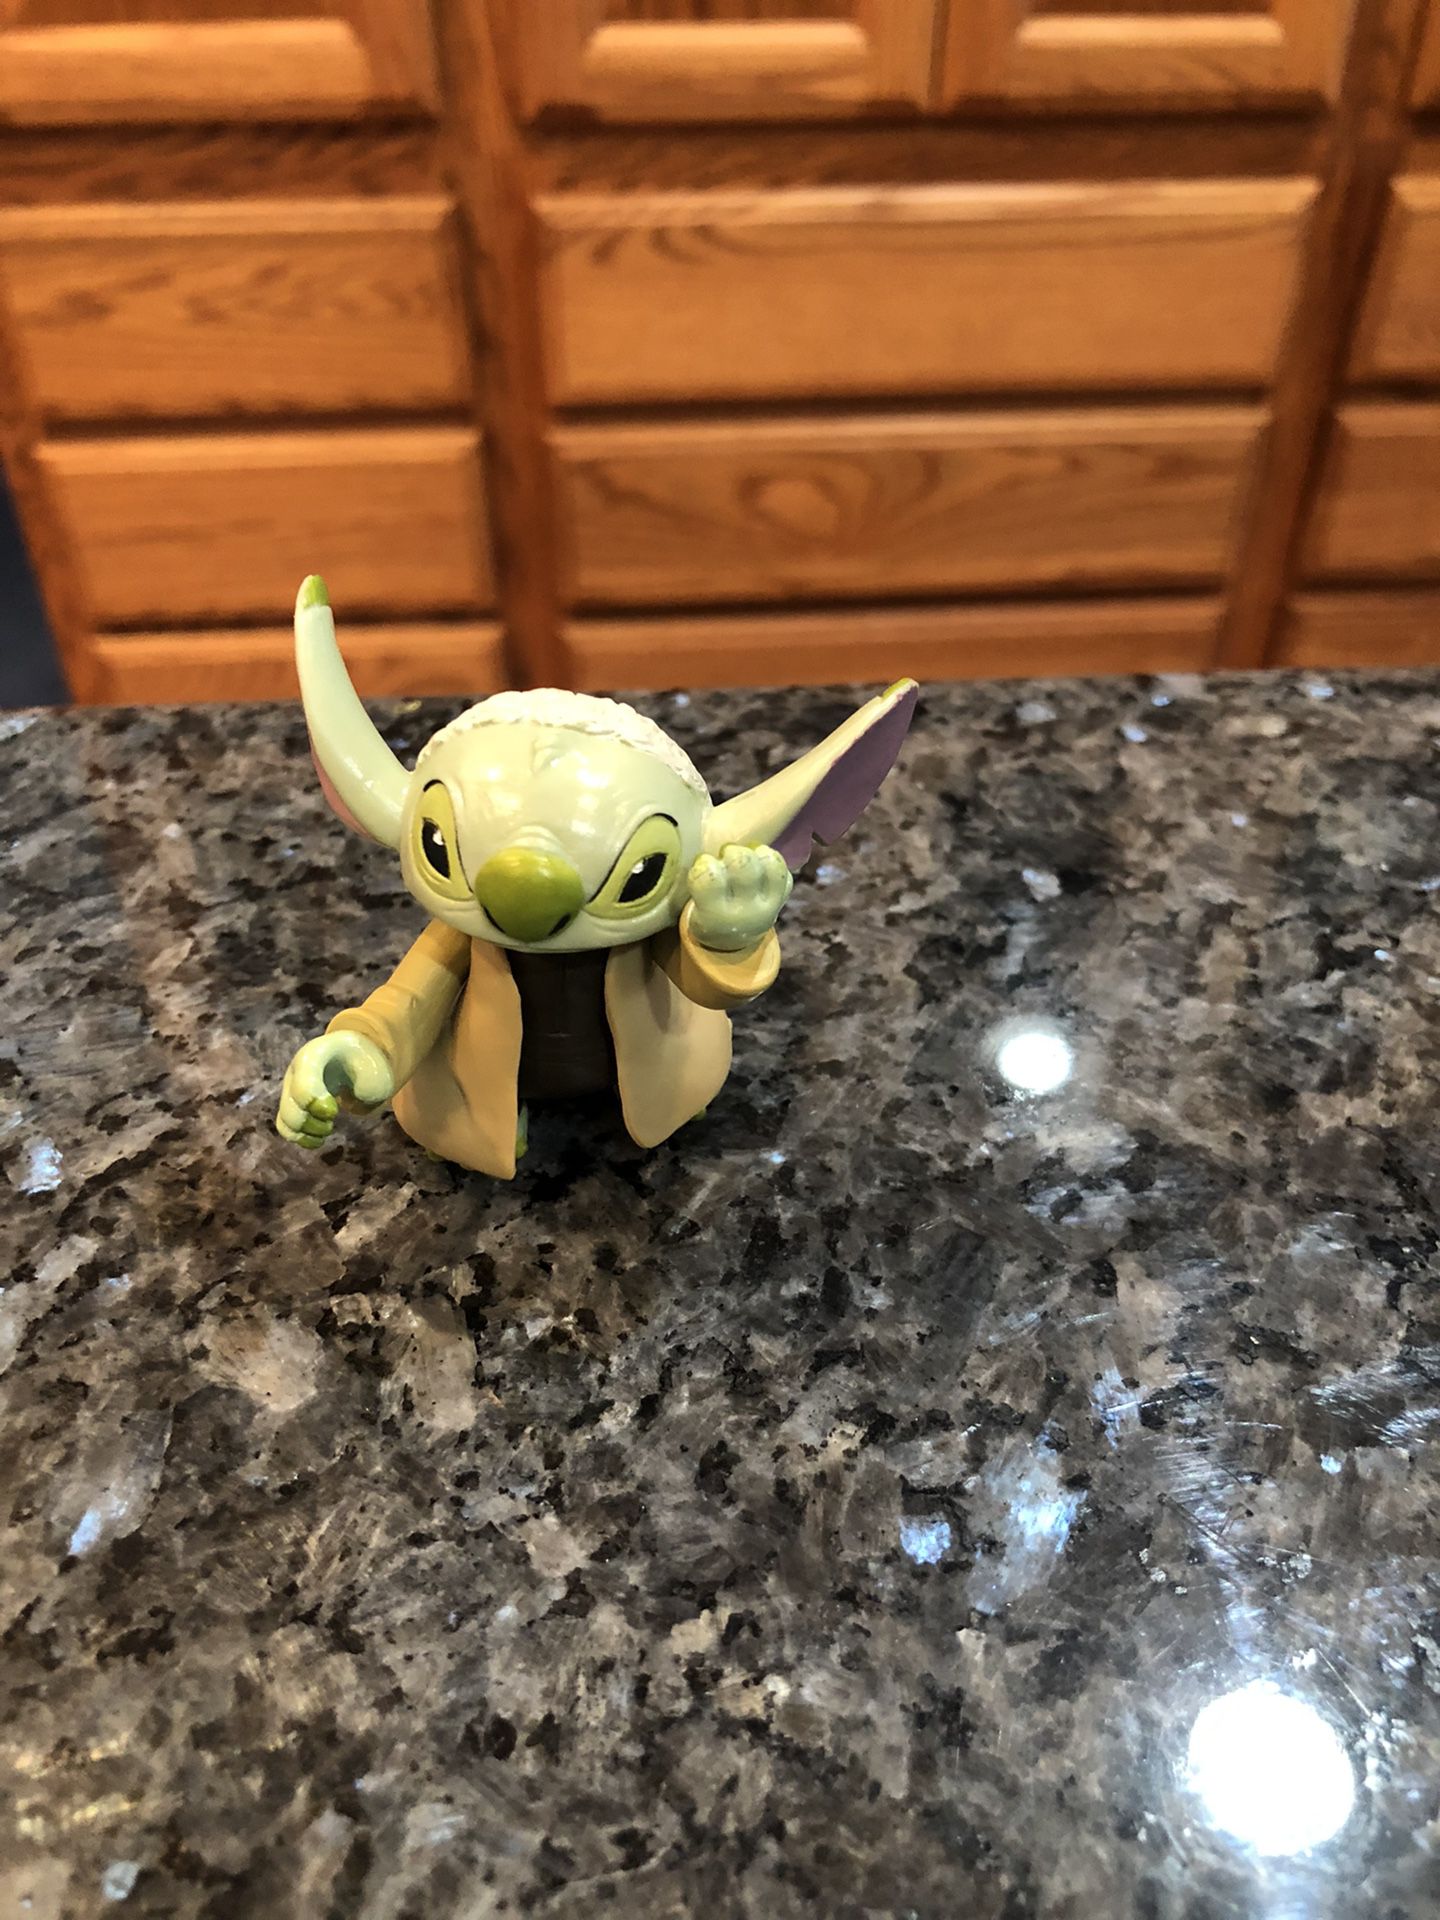 Disney Stitch Star Wars Figure .  Size 2 inches Tall .  Preowned Like New No Box 